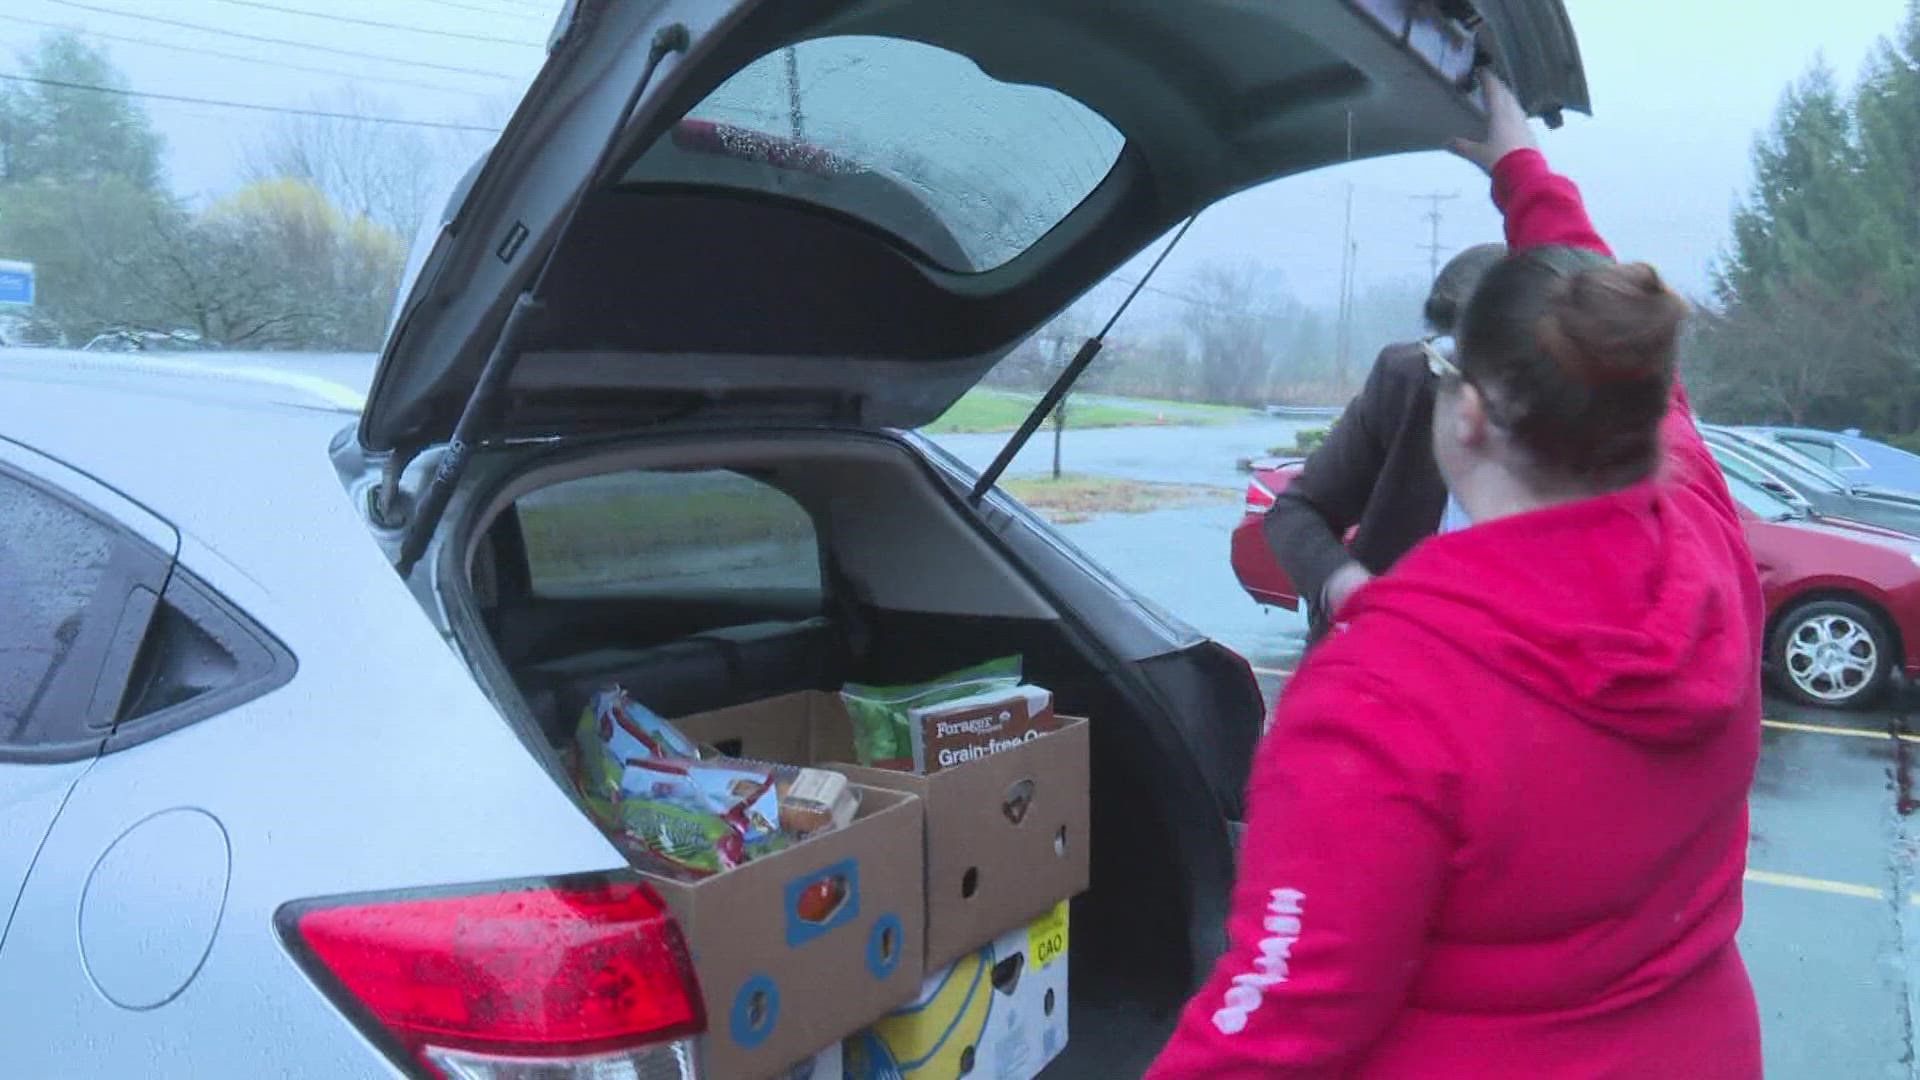 Through the Project Dash program, food can be delivered from Preble Street's Food Security Hub directly to those in need that may not be able to visit a food bank.